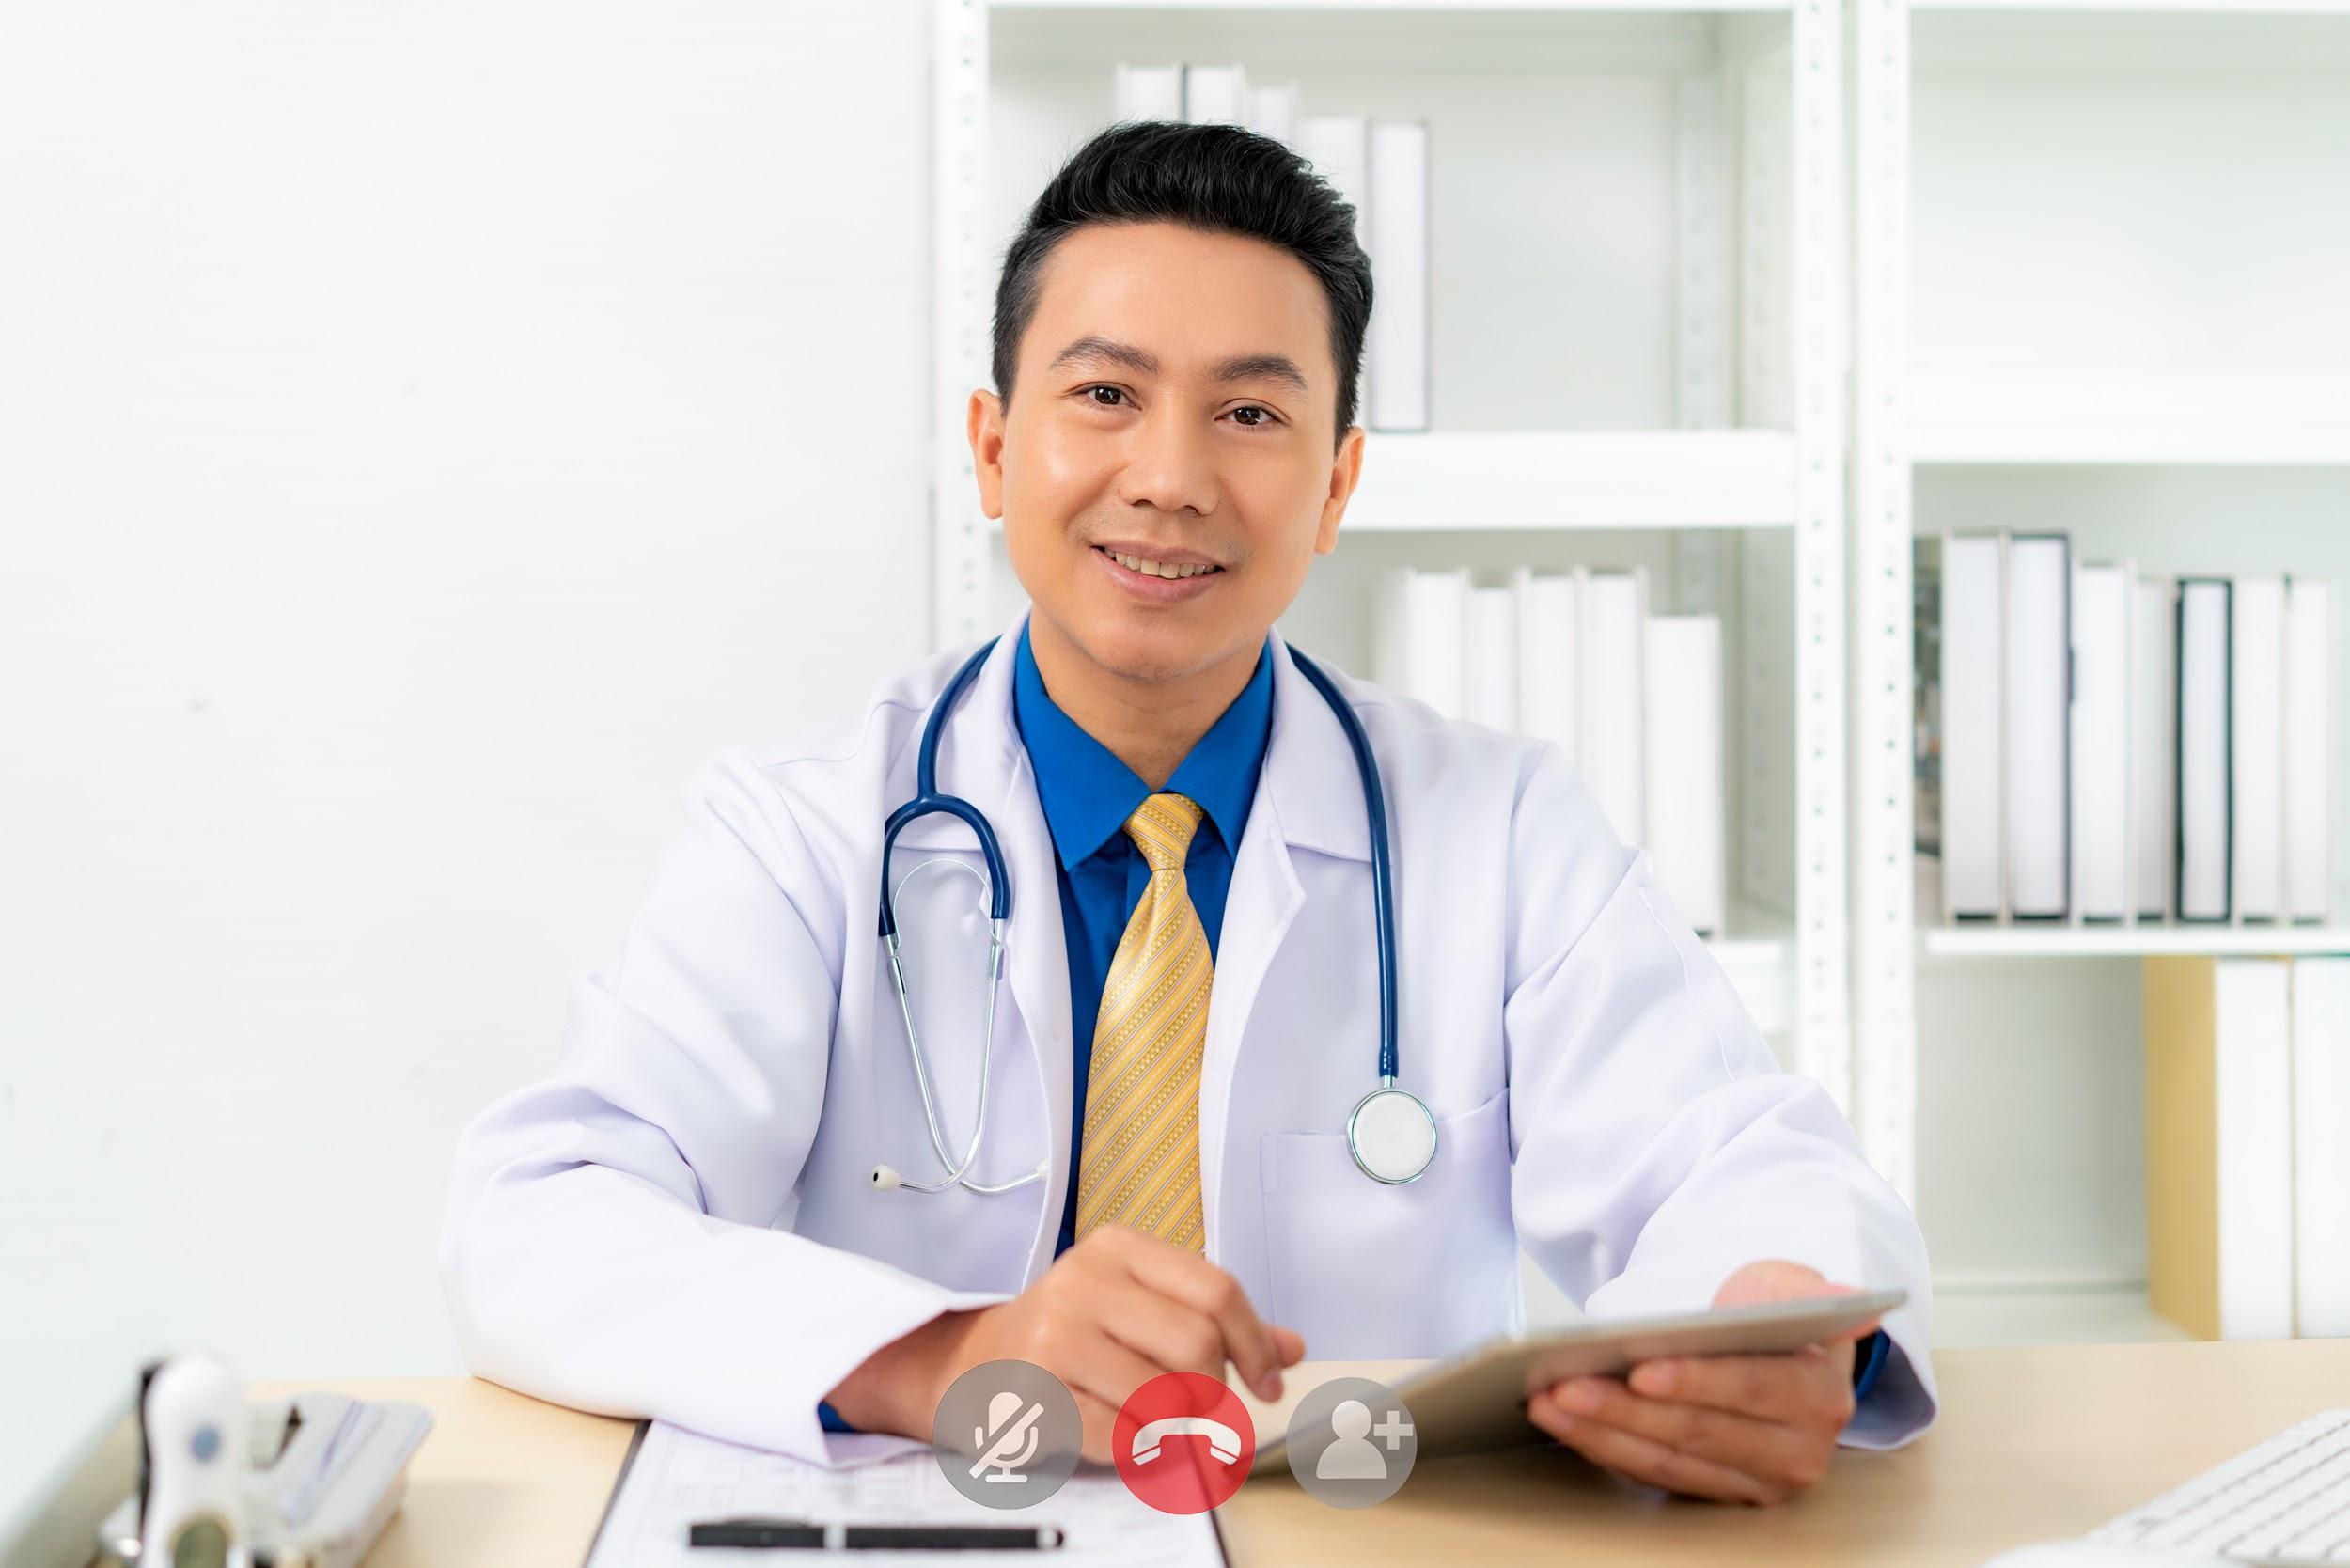 Smiling Asian doctor with digital tablet looking at camera.